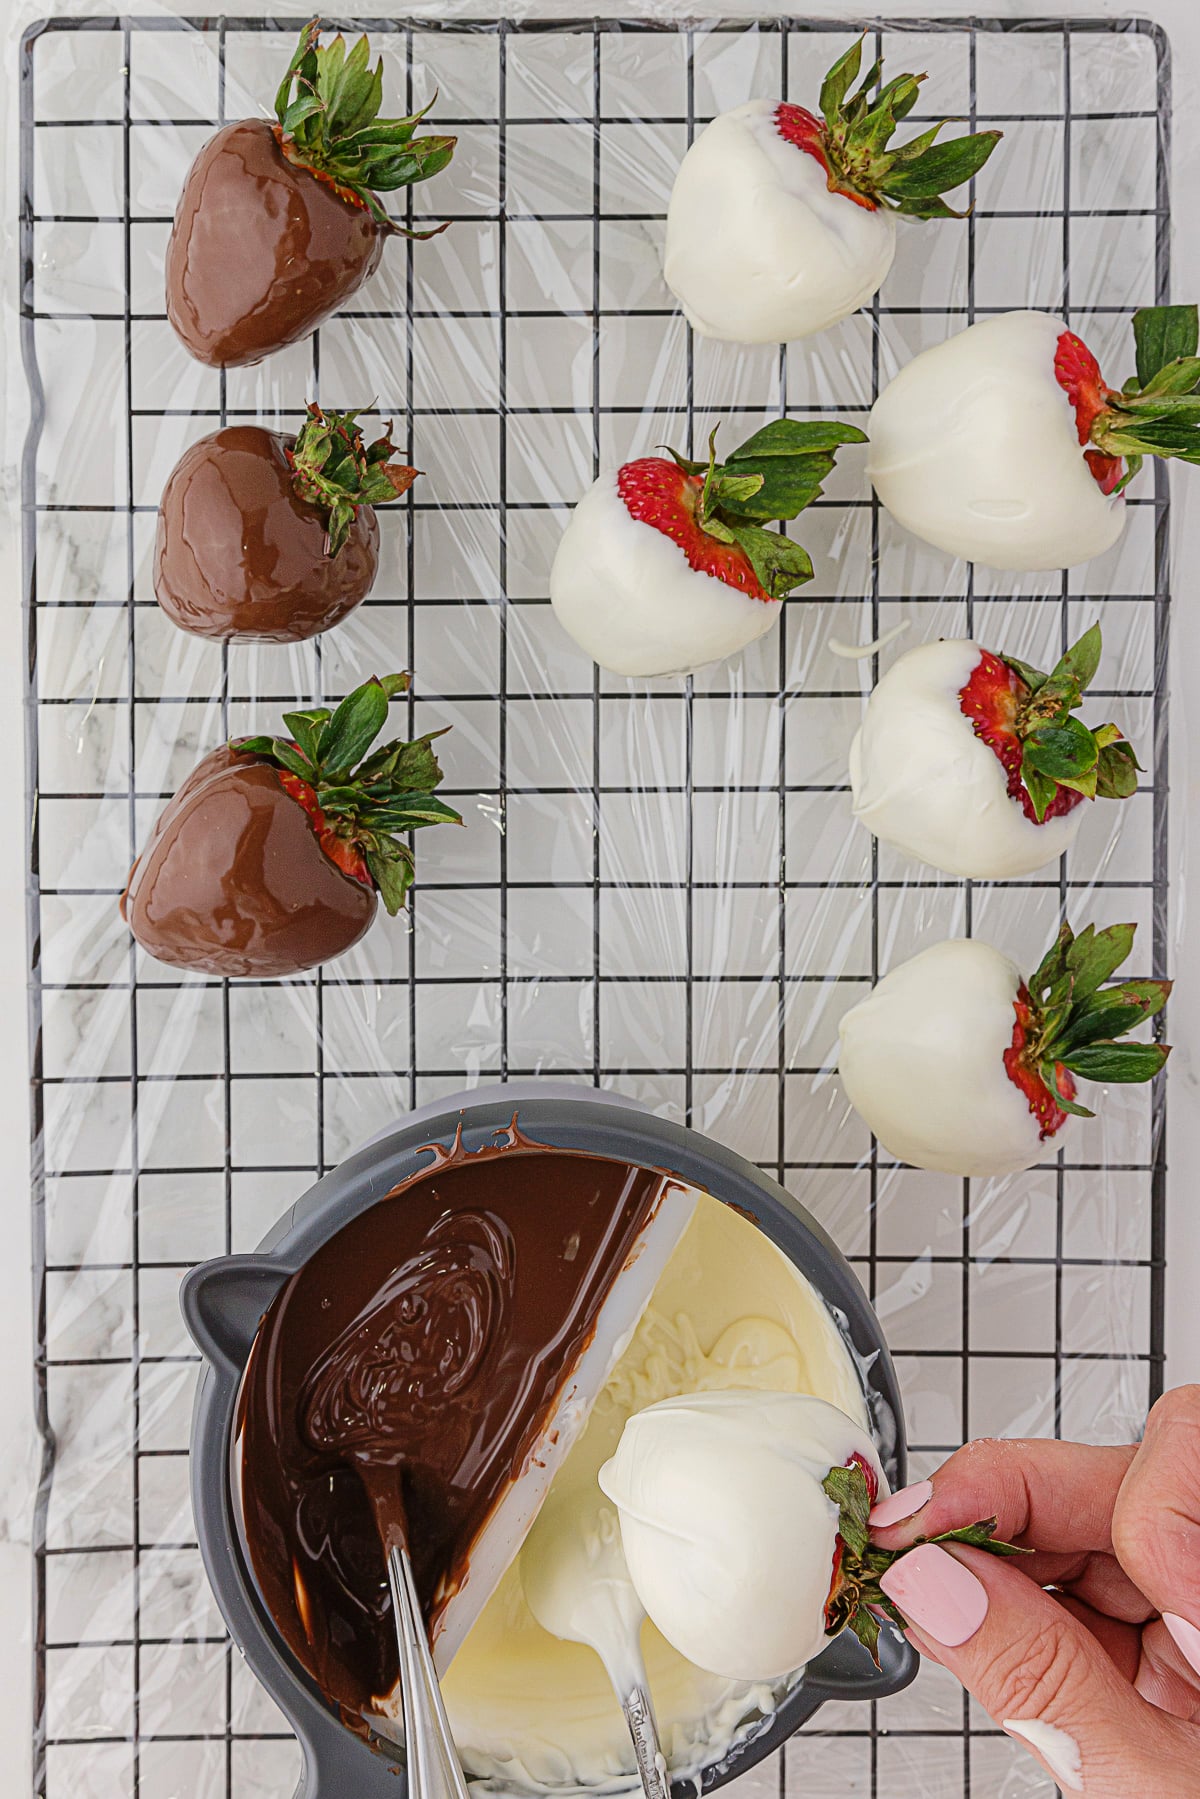 3 strawberries dipped in dark chocolate and 5 strawberries dipped in white chocolate on a rectangular metal rack, and 1 more strawberry in hand recently dipped in white chocolate